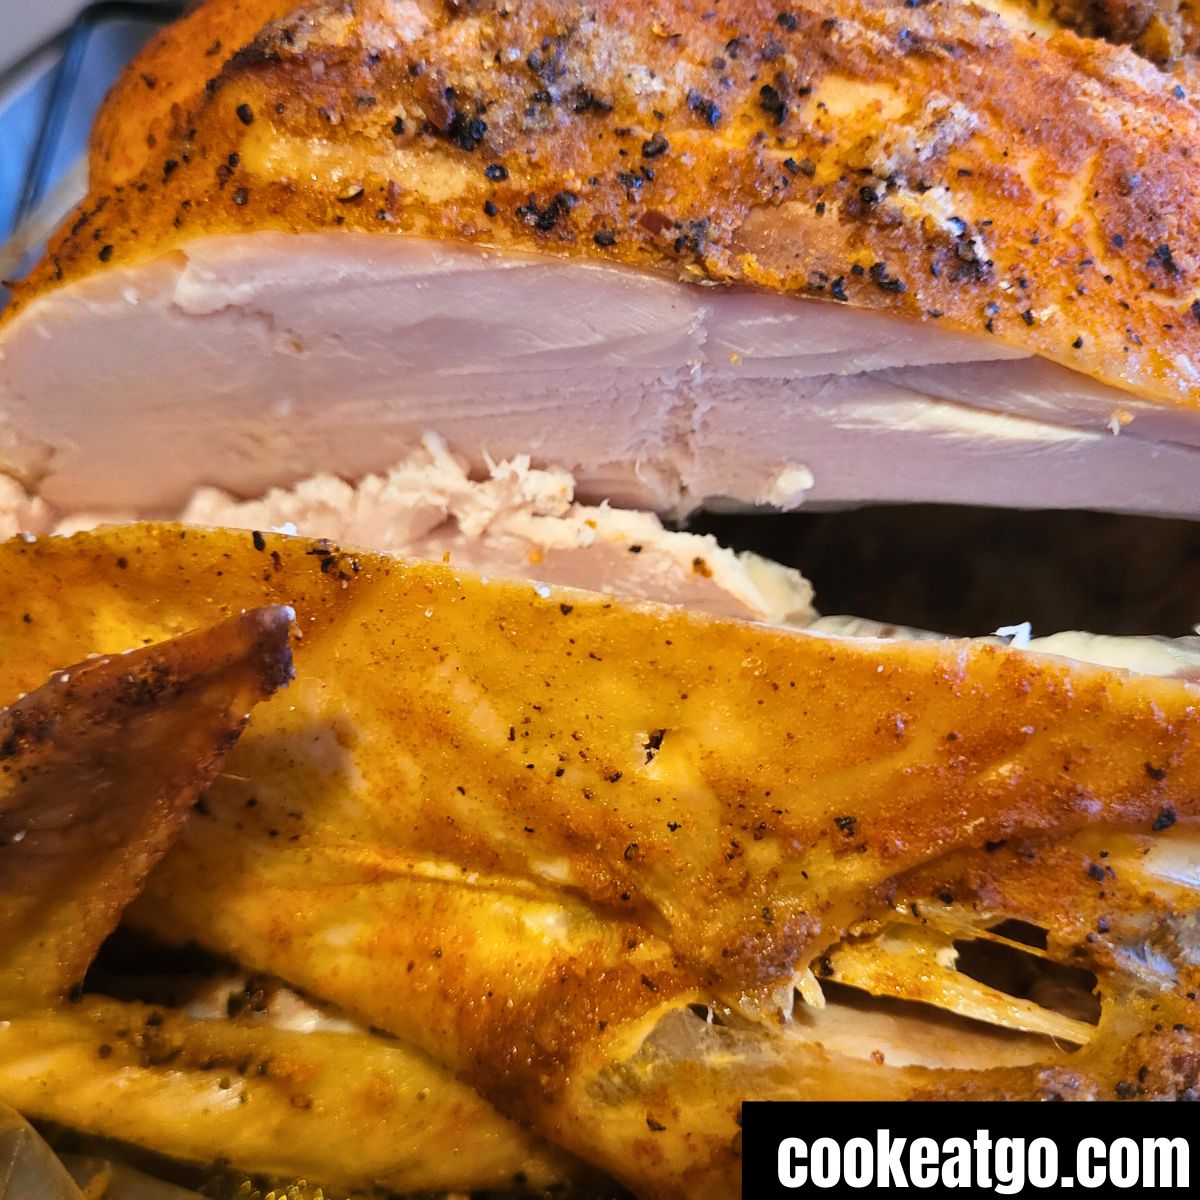 How To Cook A Turkey In The Oven  #thanksgivingdinner #christmasdinner https://t.co/oxqhmqZMoY https://t.co/N1Im866igk